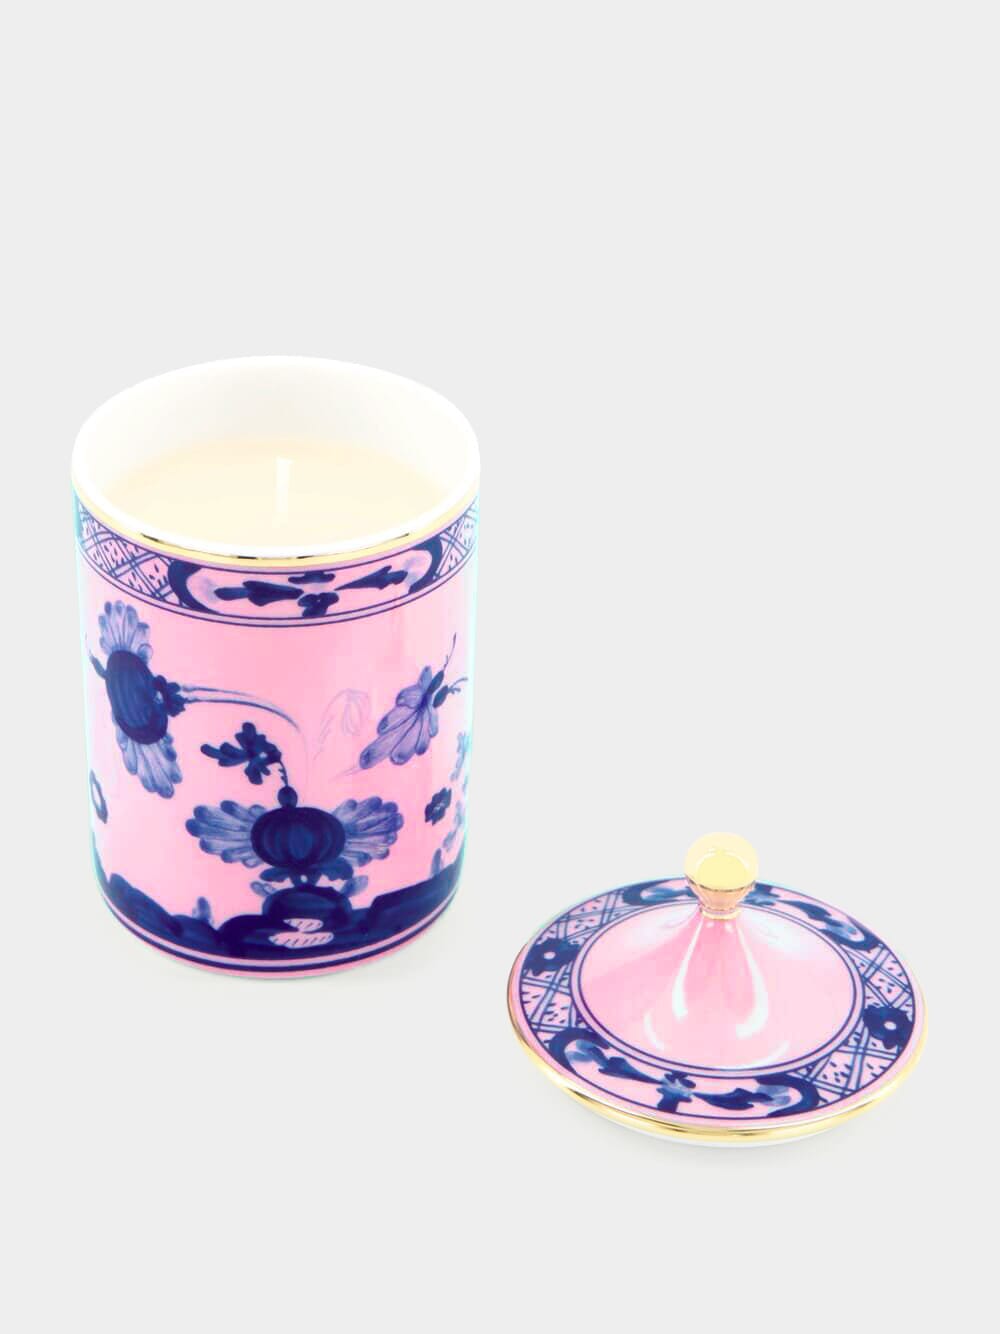 Candle with cover